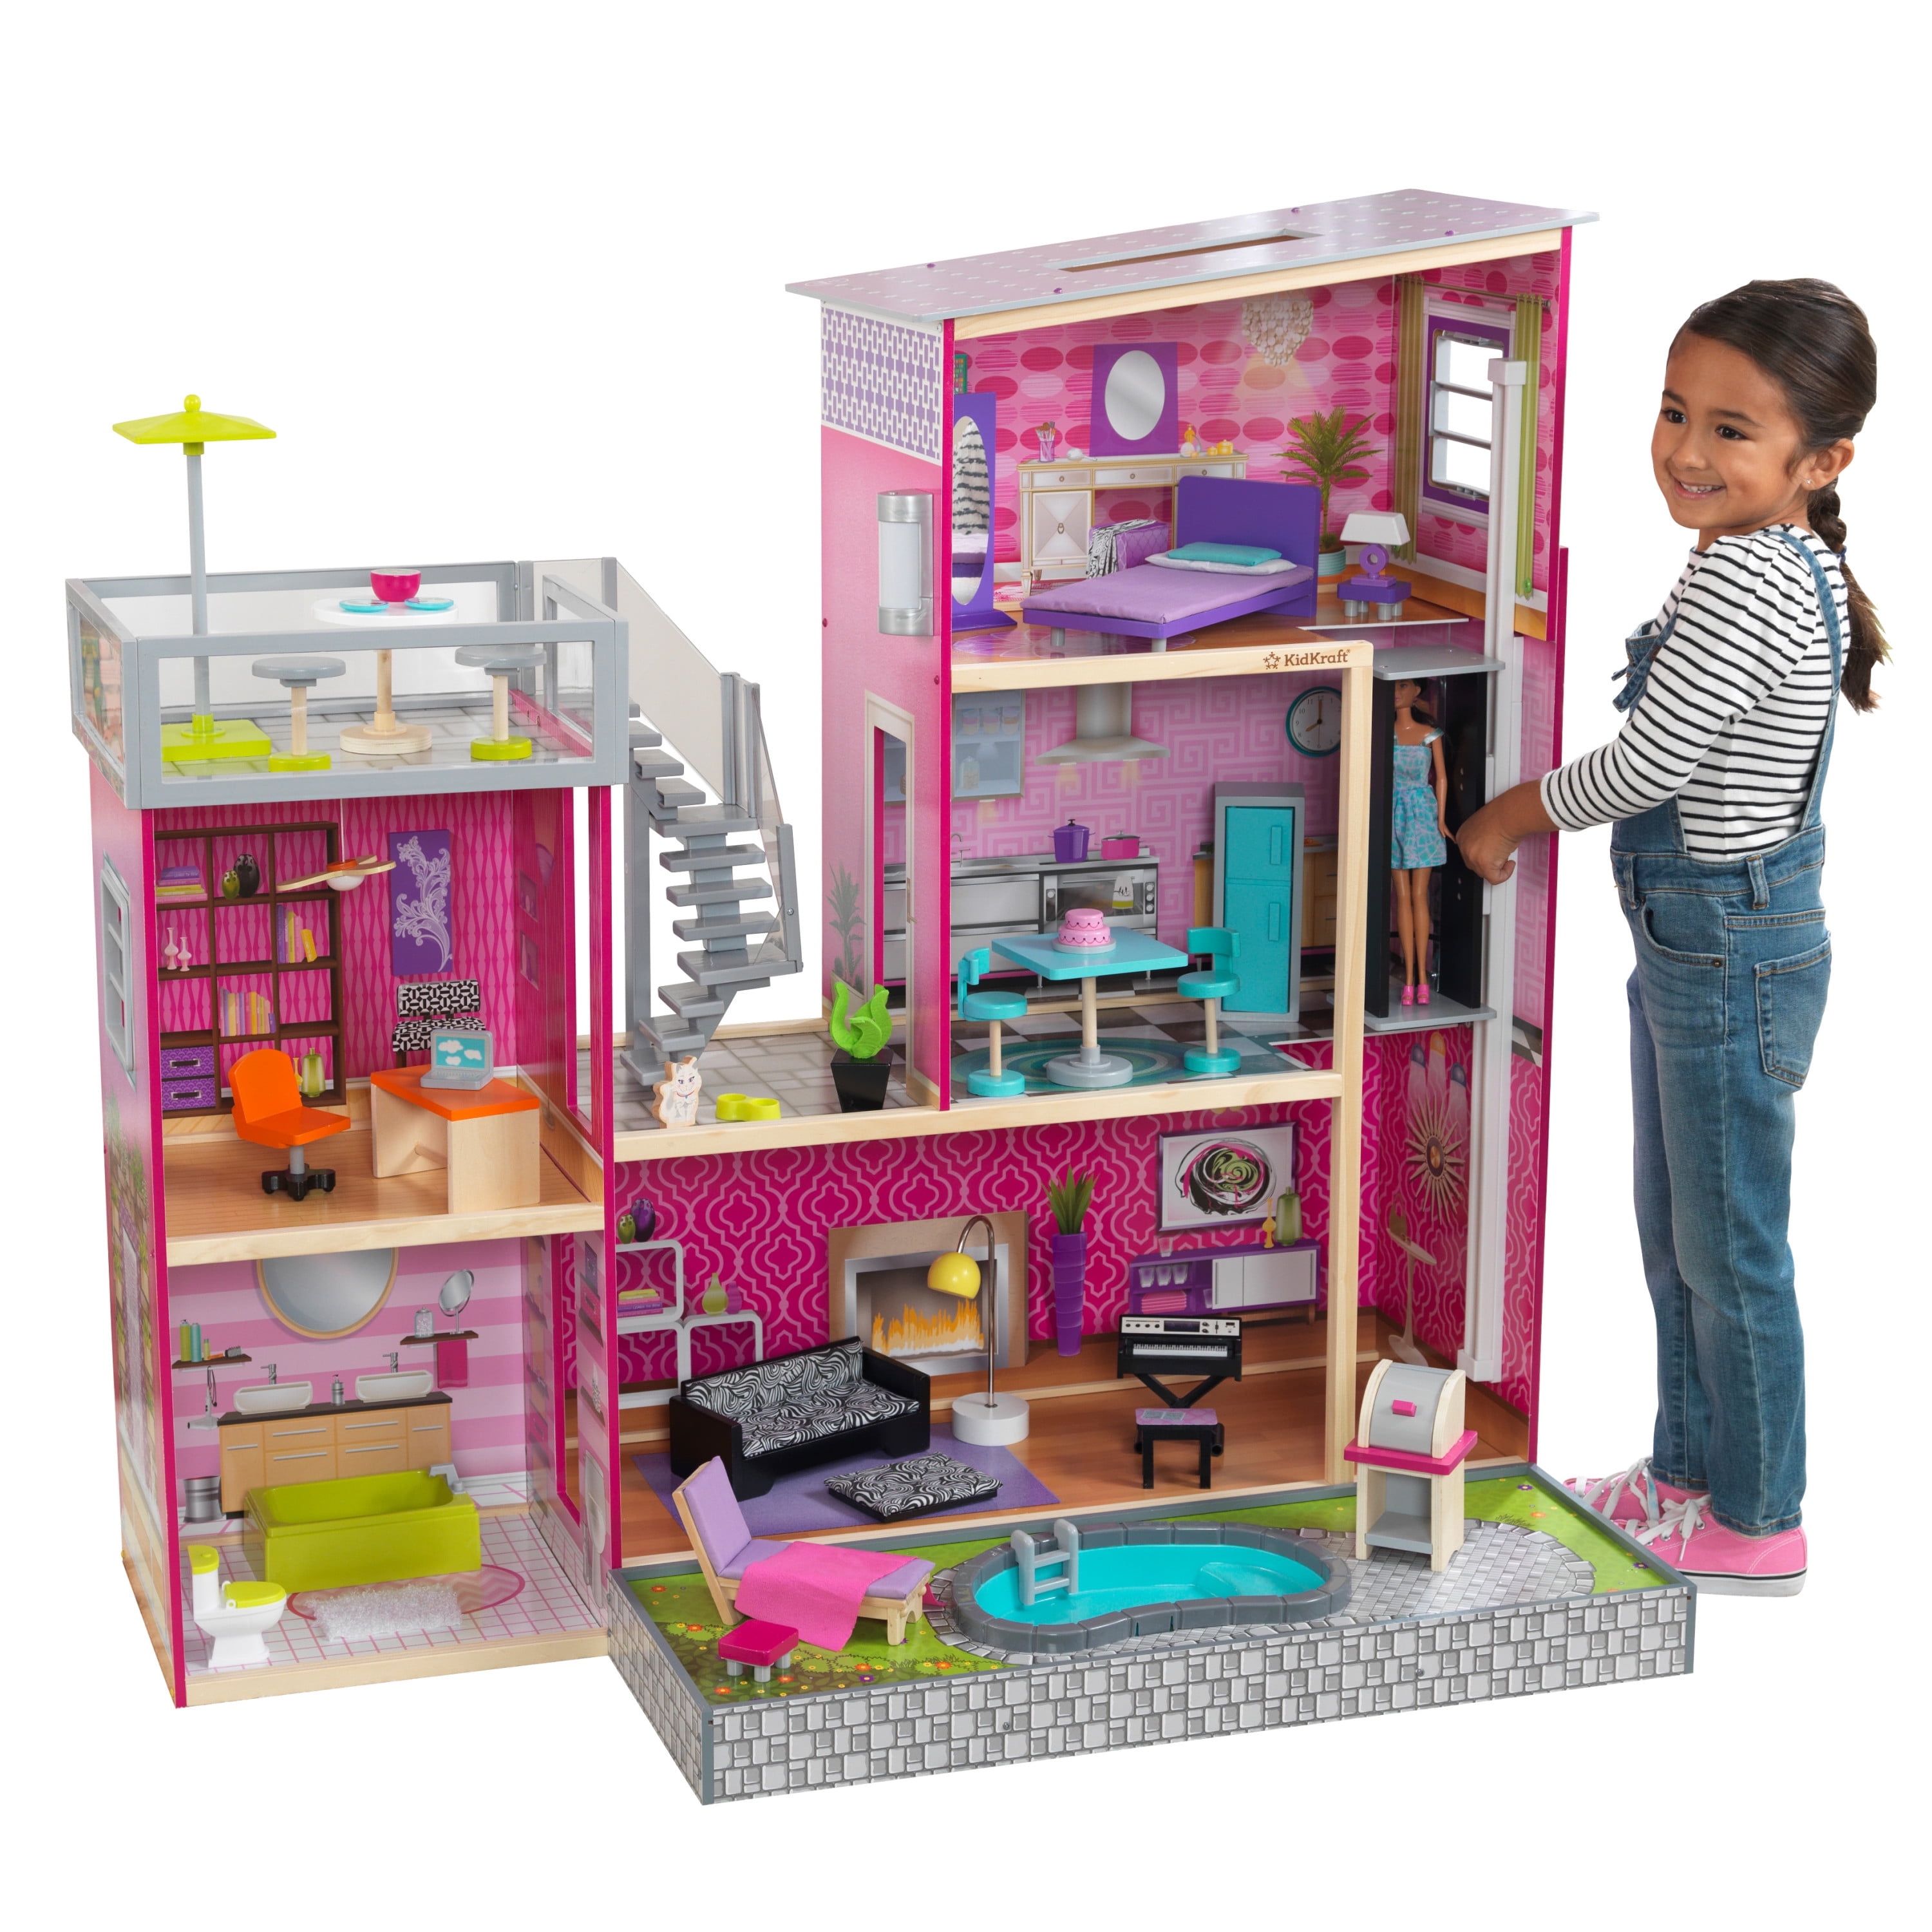 kids wooden dolls house 115cm tall 3 story play house with lift and furniture 